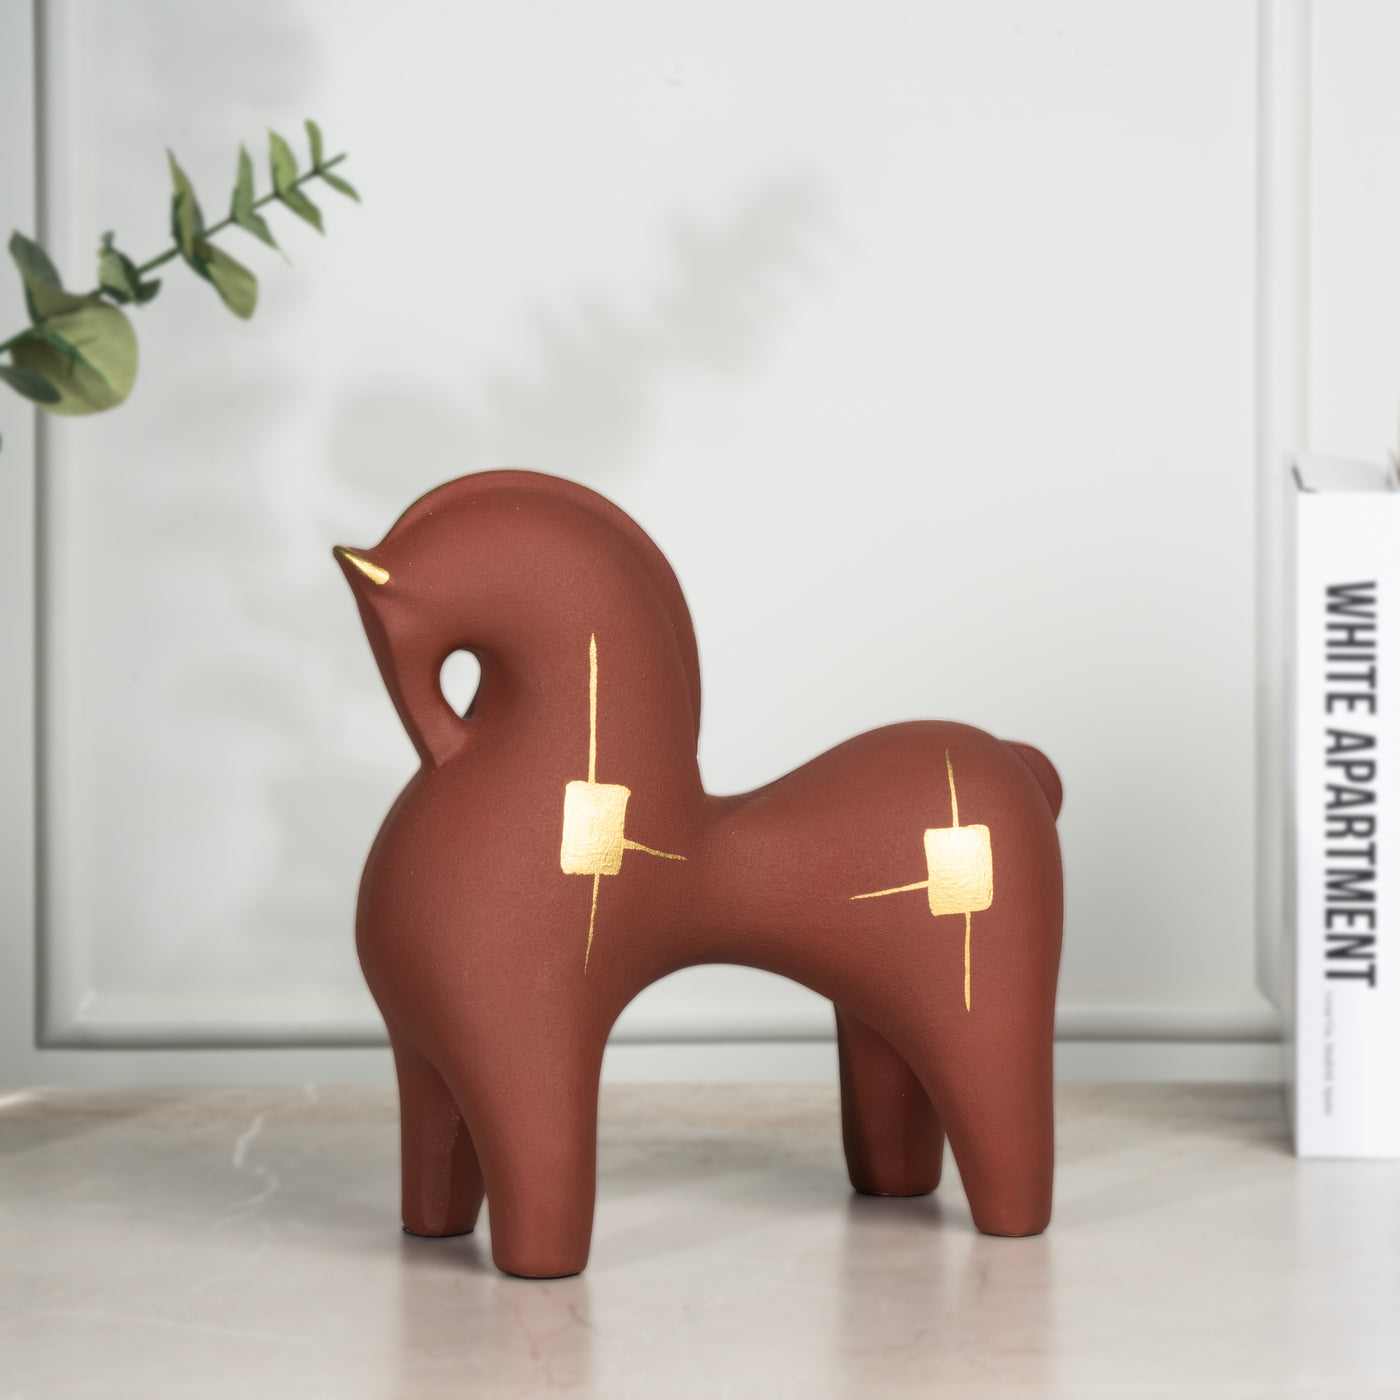 The Adorable Foal Statue